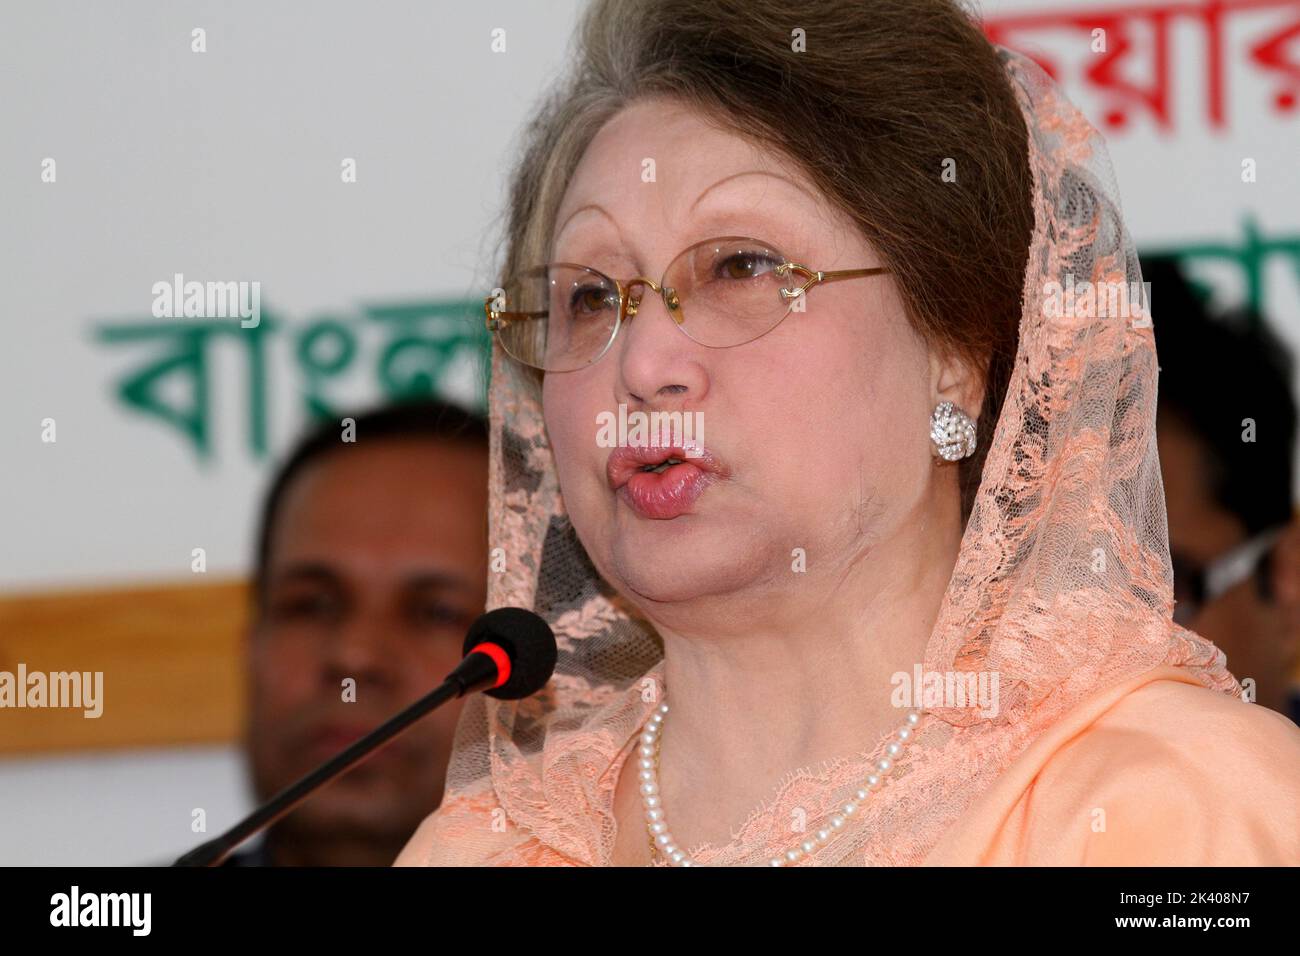 Dhaka, Bangladesh - December 31, 2014: Former Prime Minister and BNP Chairperson Begum Khaleda Zia is addressing a press conference at Gulshan office Stock Photo